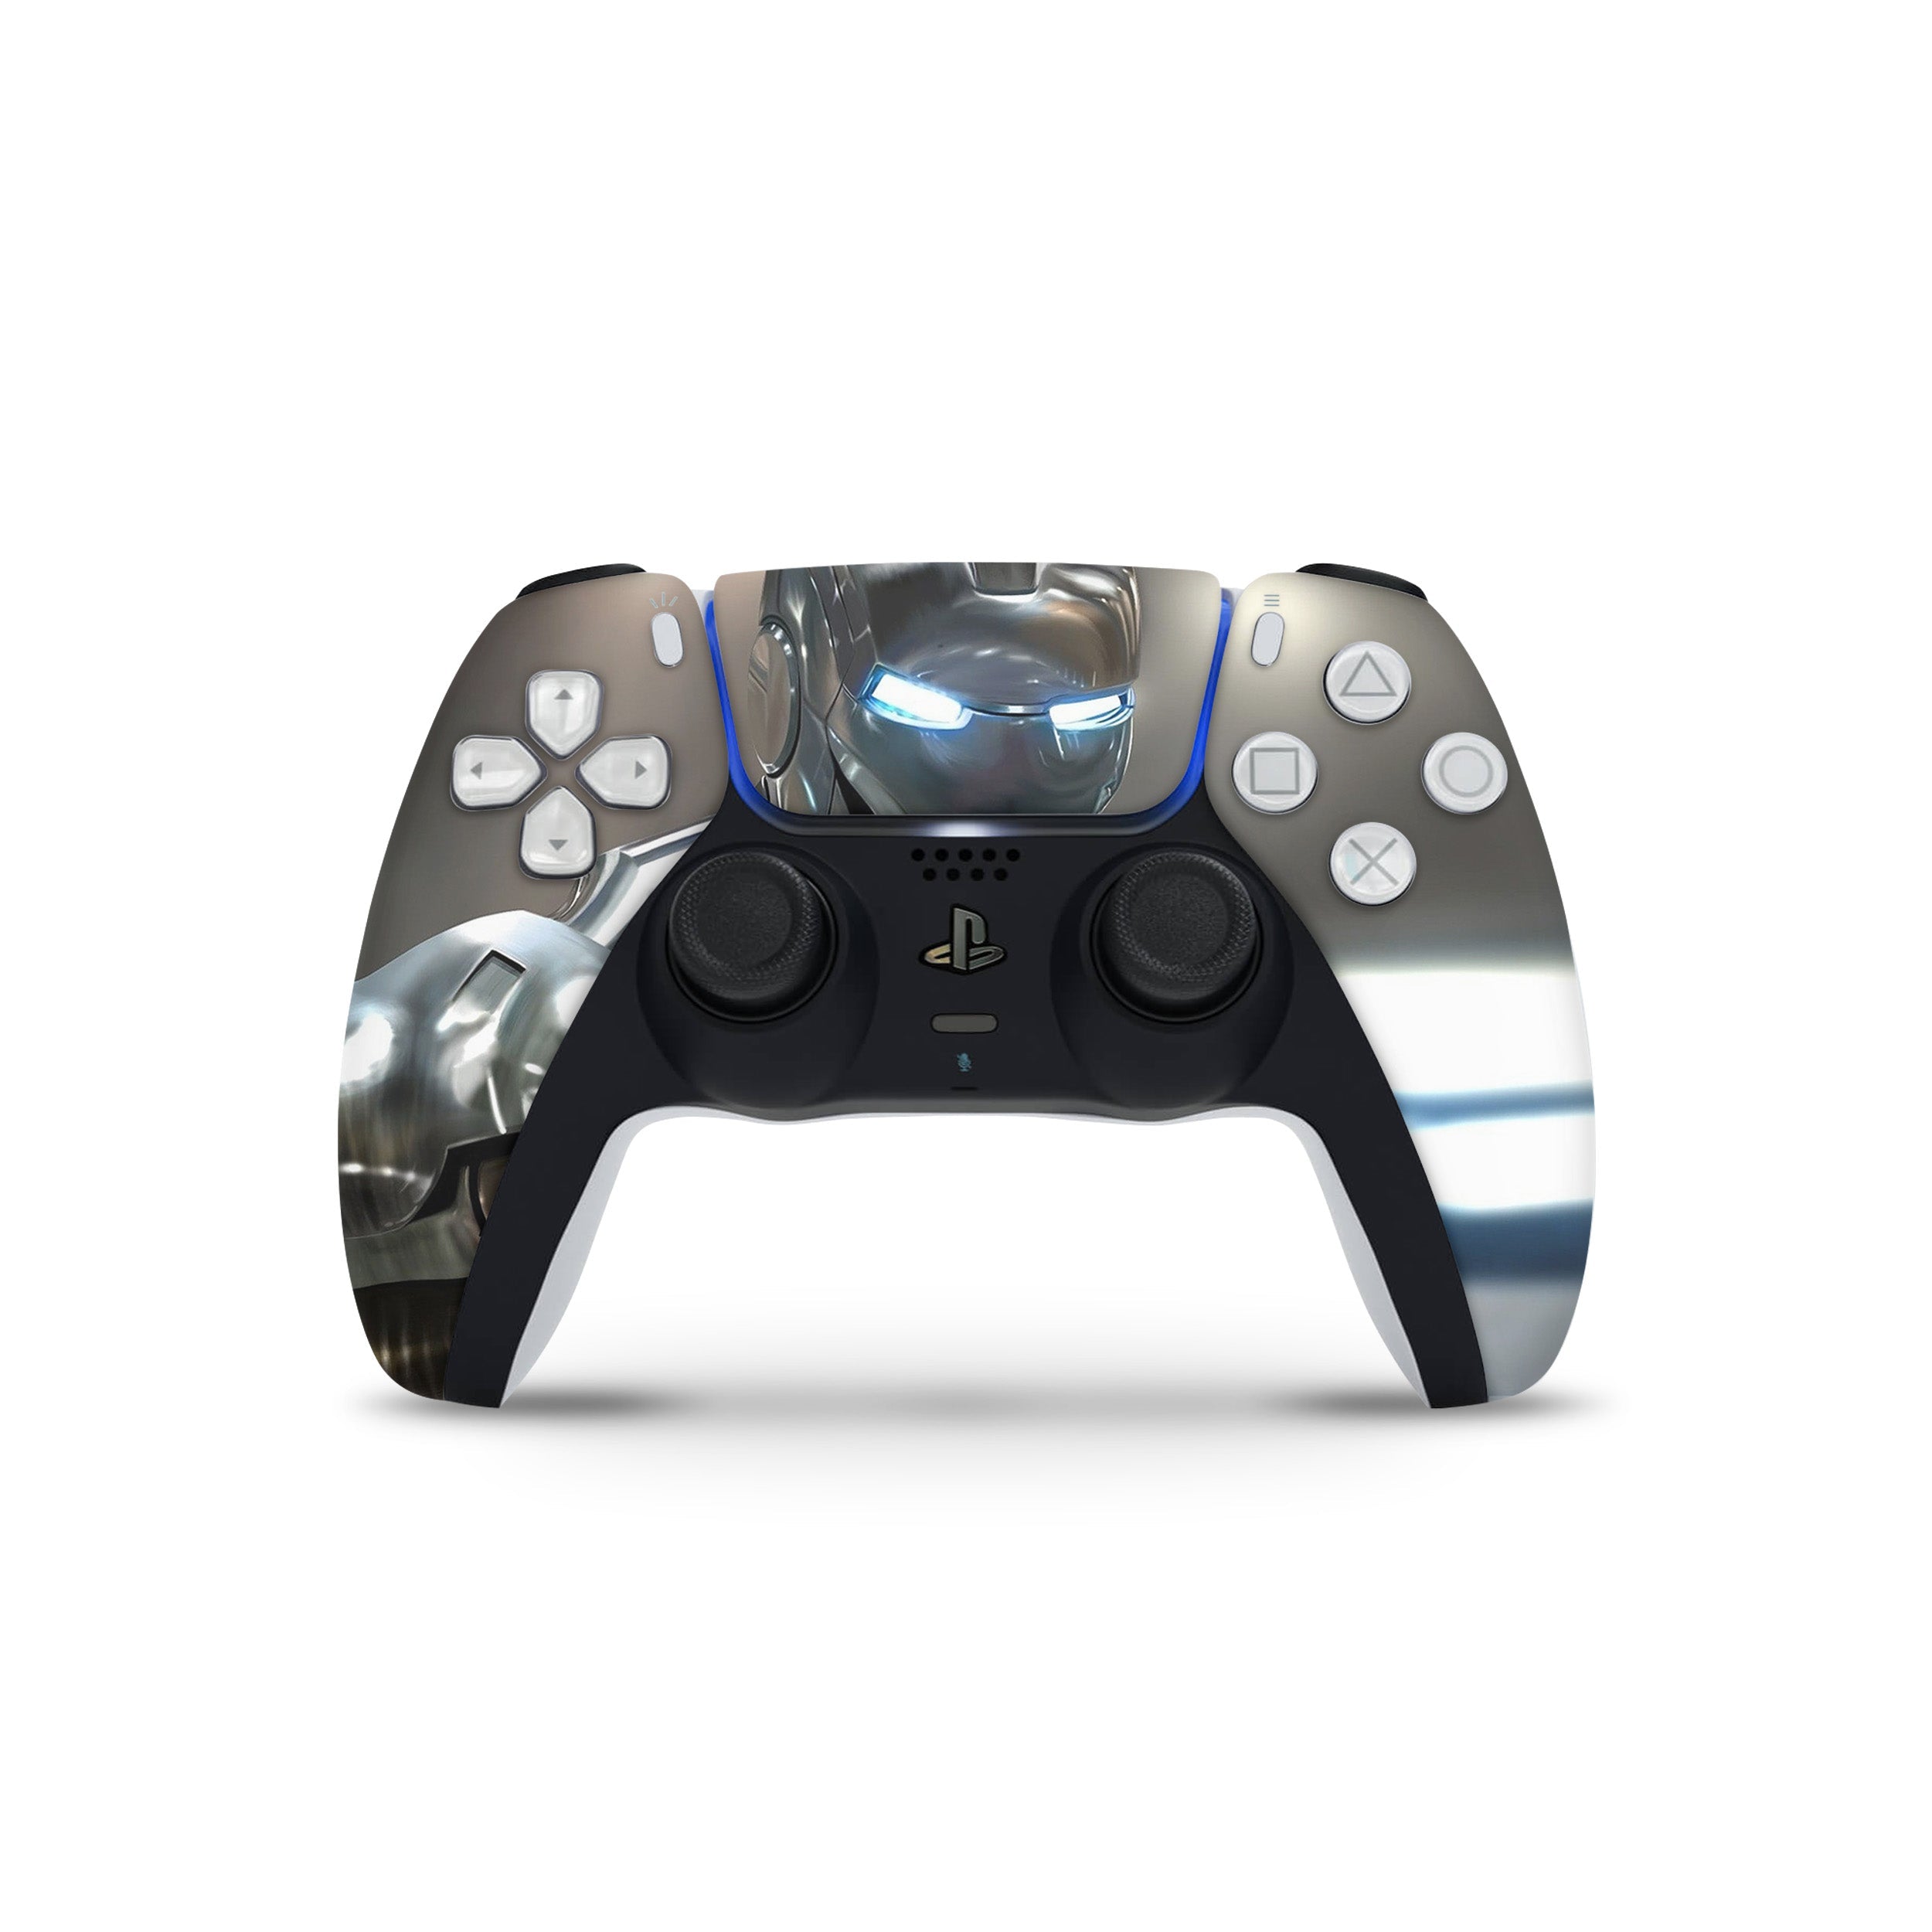 A video game skin featuring a Marvel Iron Man design for the PS5 DualSense Controller.